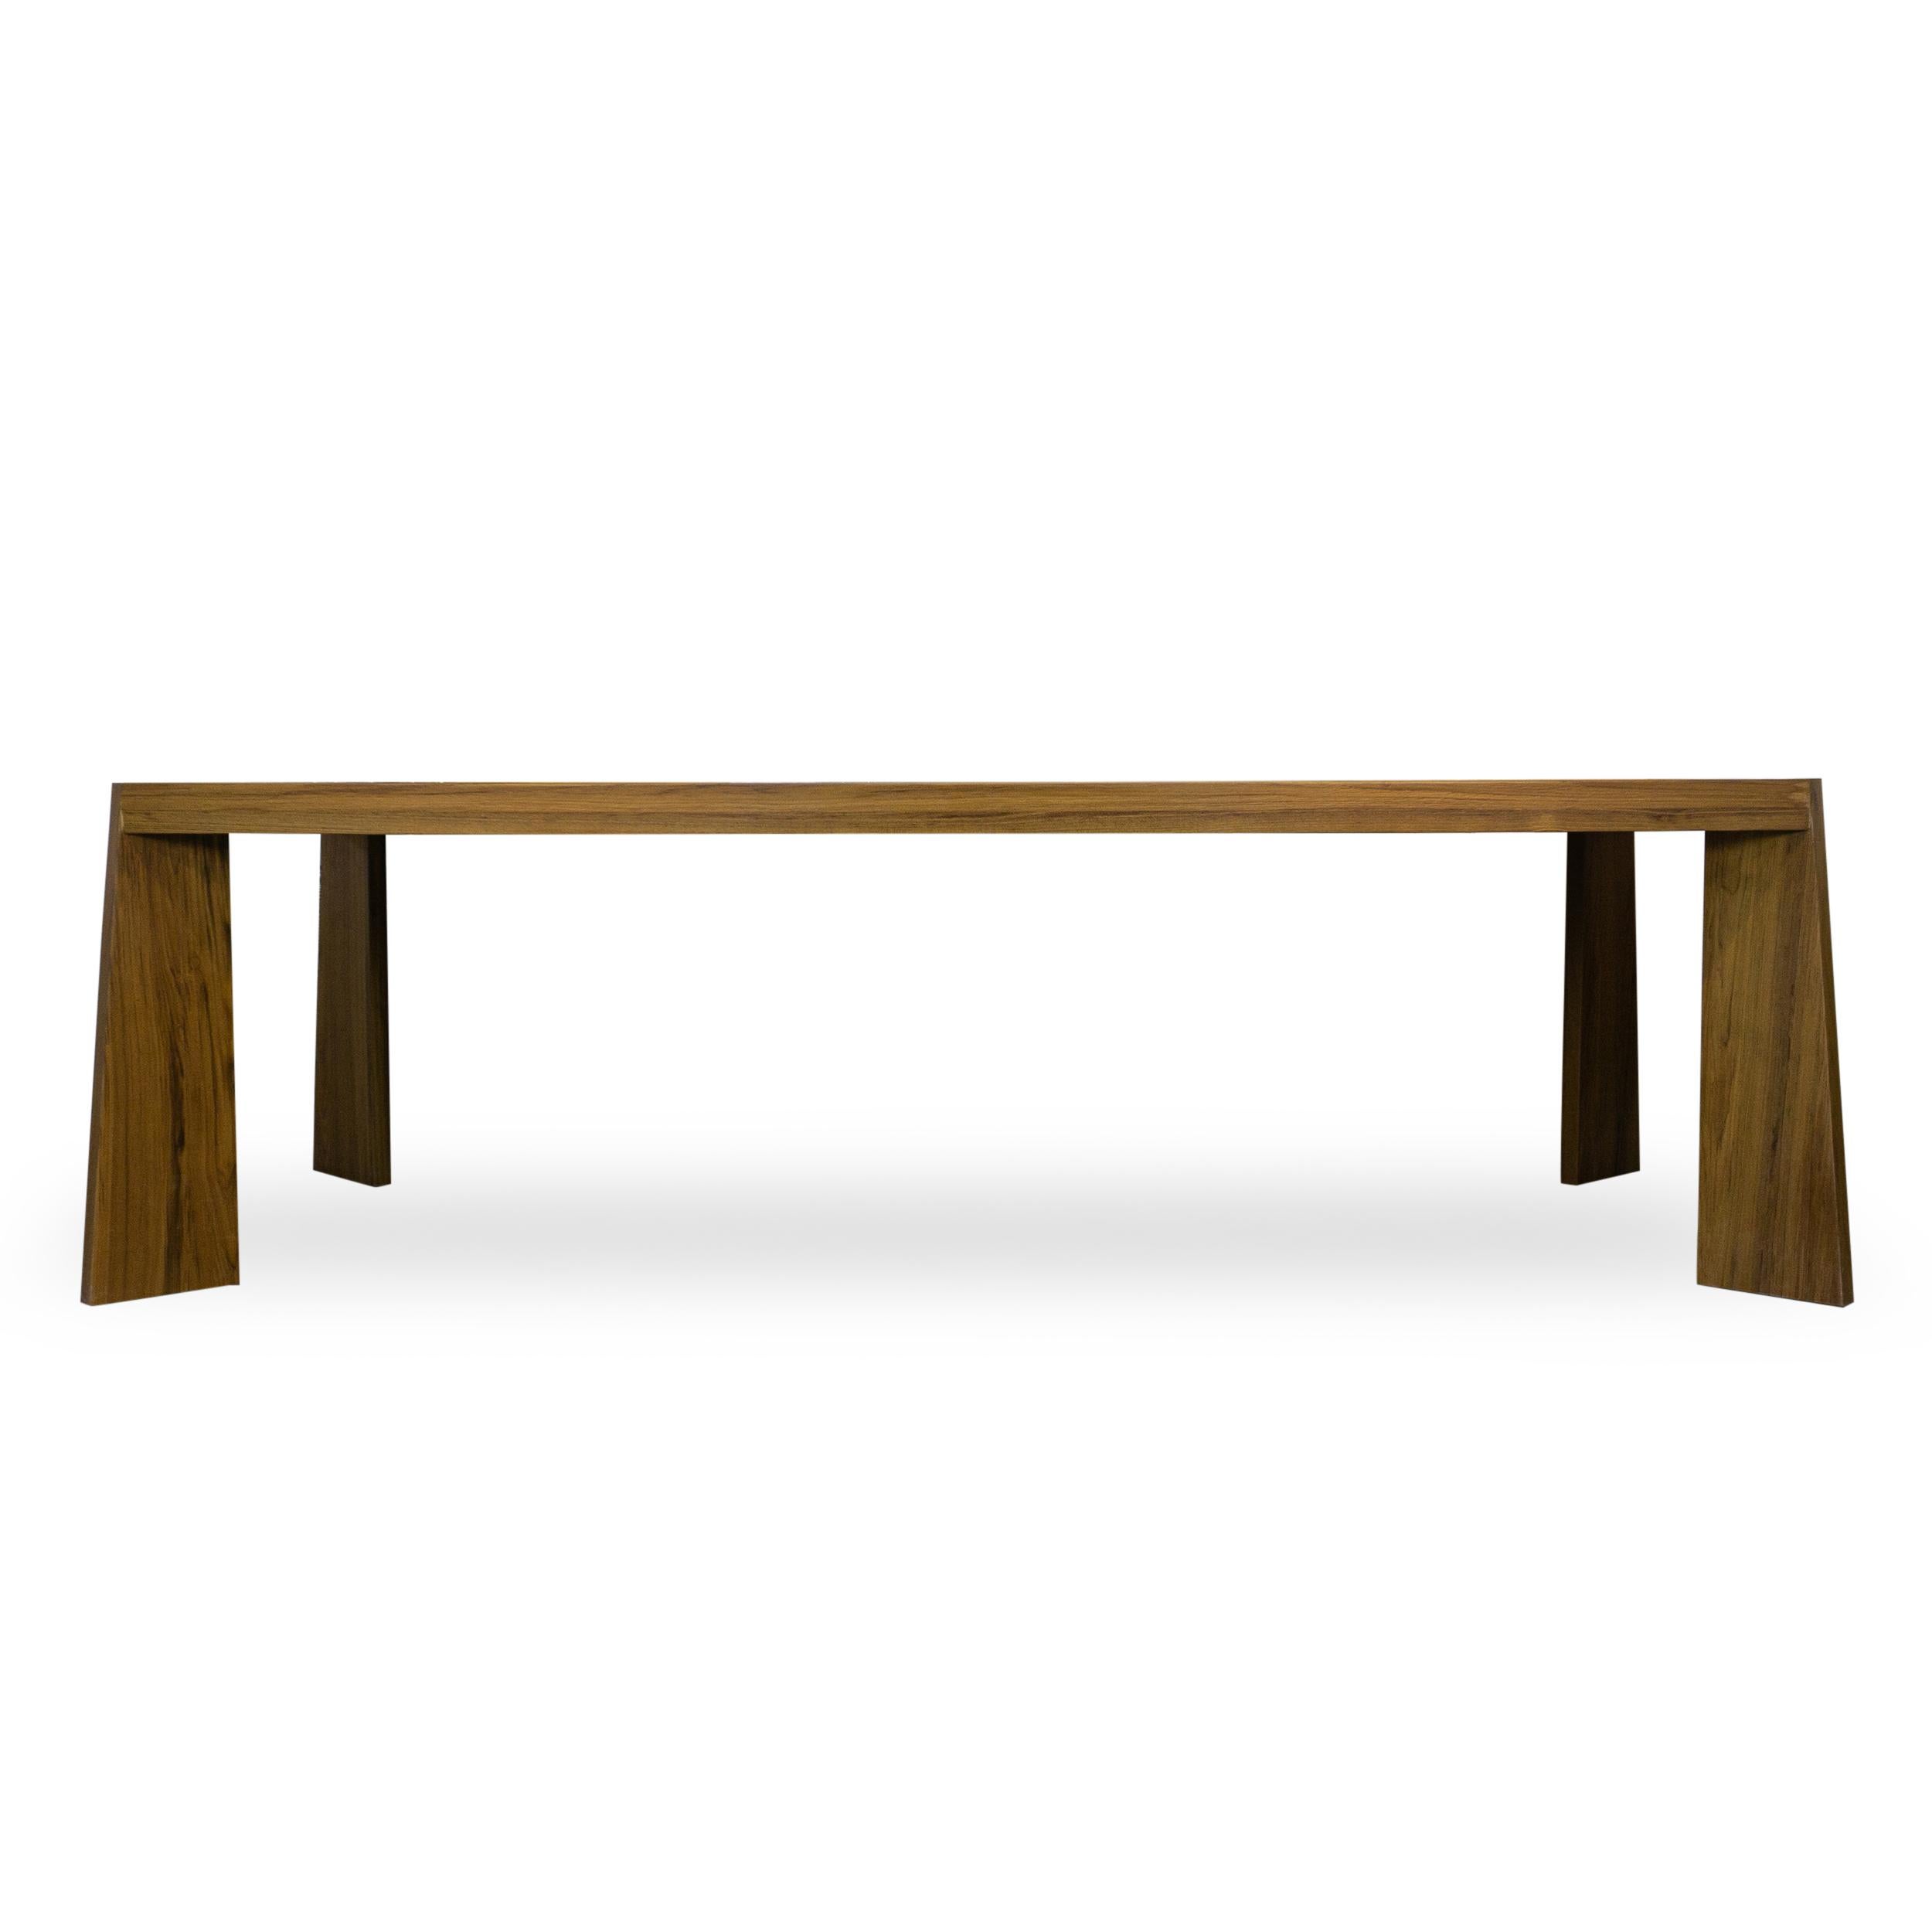 100% solid teak dining table with tapered legs and live edge feature in middle of table. Grain has much contrast including blondes and browns. Designed by Jhon Ortiz and manufactured in Norwalk CT.

Overall: 43”W x 98”D x 30”H

Price As Shown: